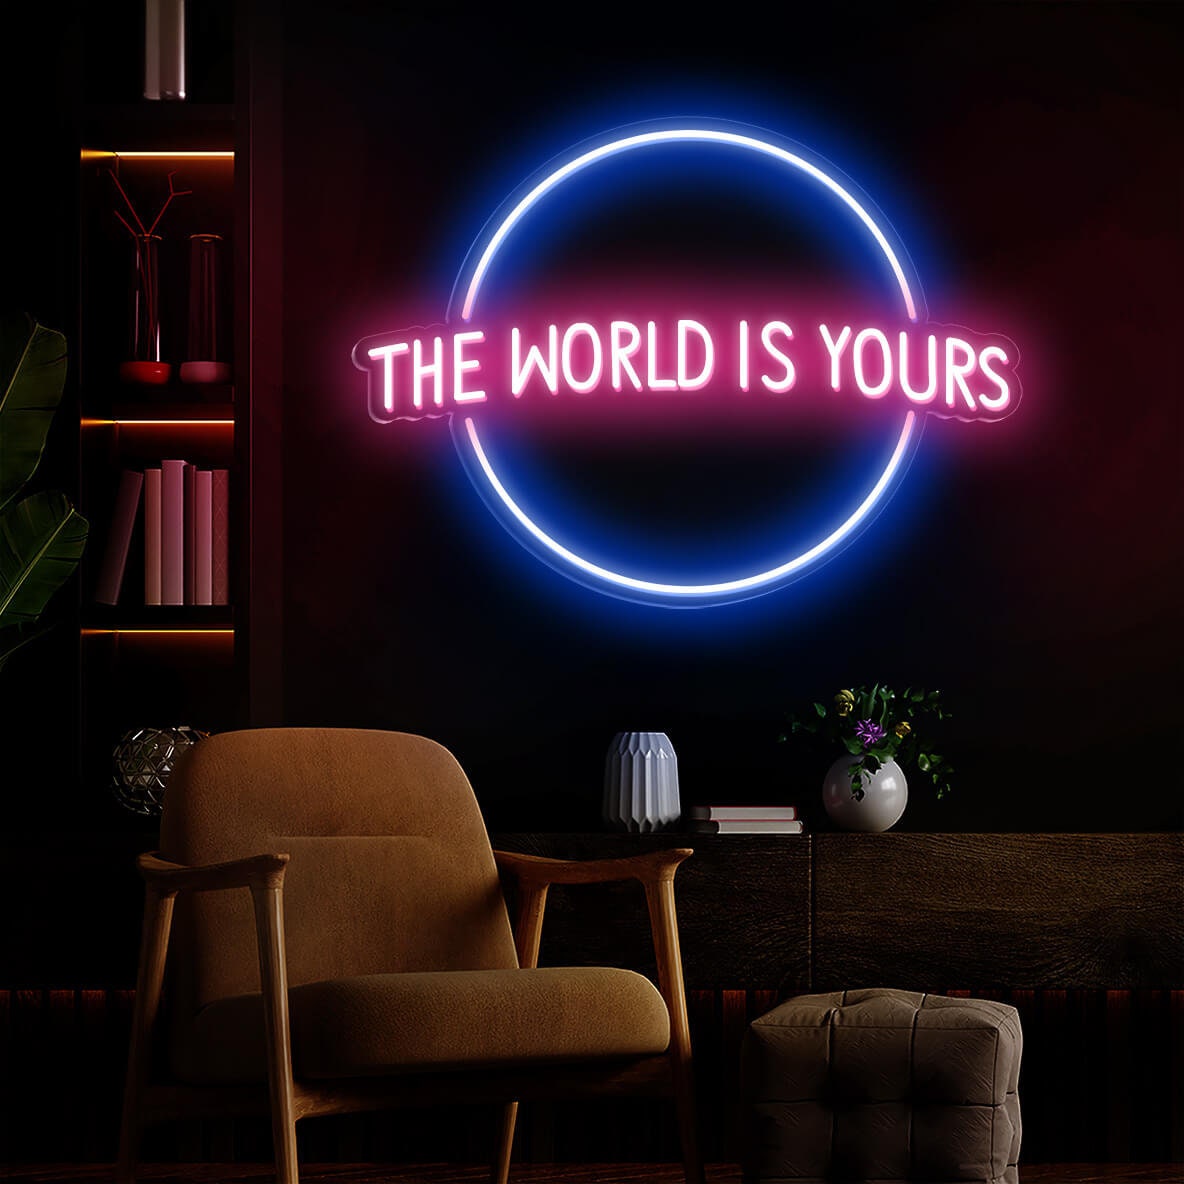 The World is Yours Neon Sign Pink Led Light, Neon Sign Bedroom, the World  is Yours Neon Sign for Home Decoration,handmade Wedding Gift 